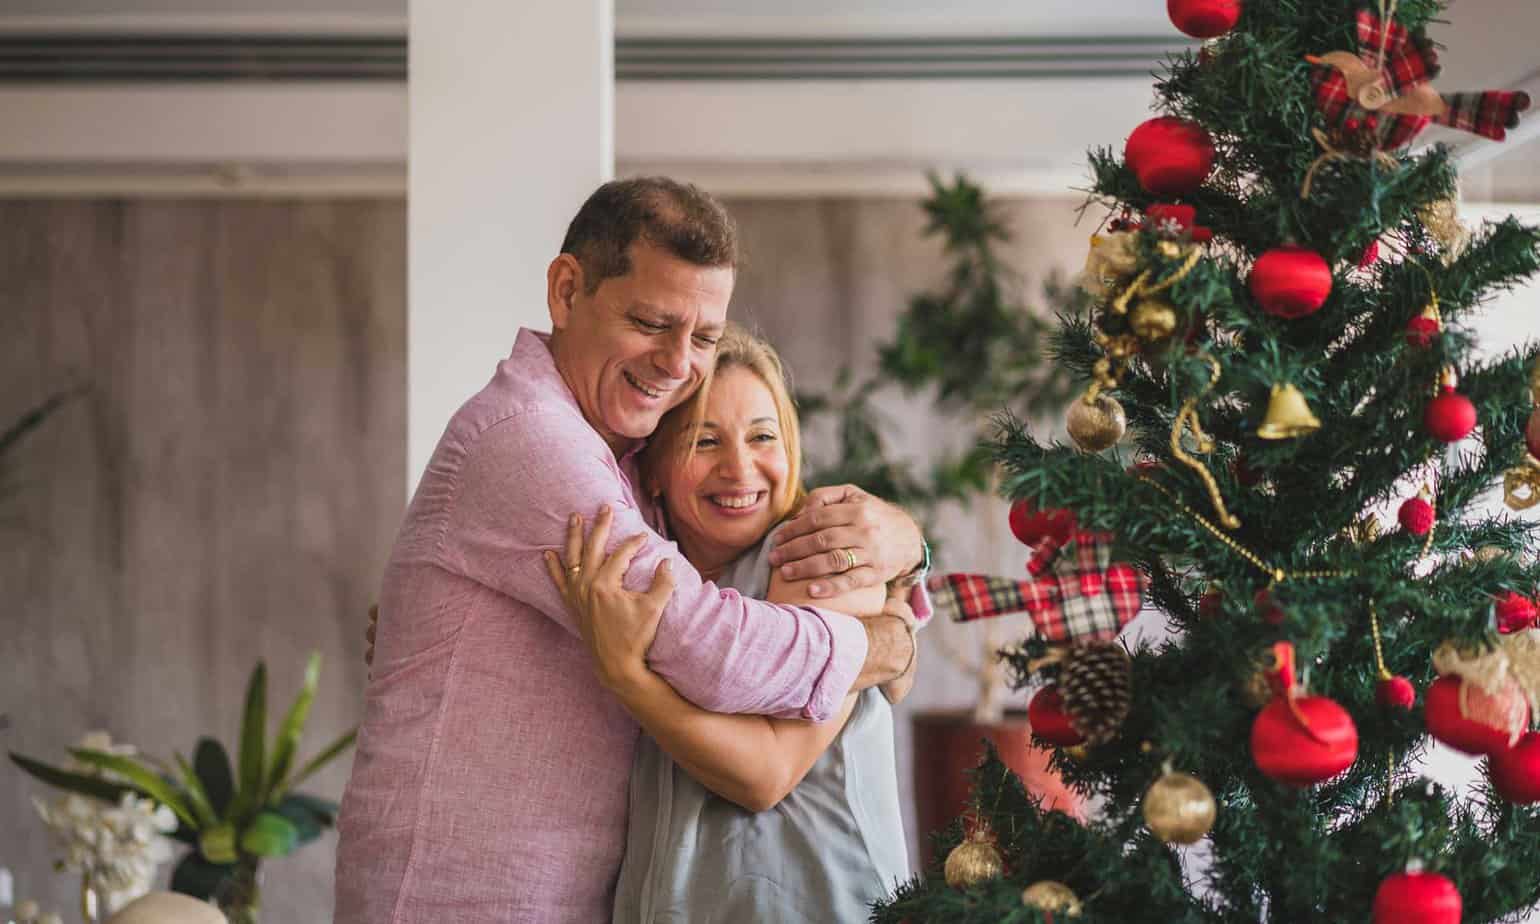 man and woman hugging each other by christmas tree during the holiday season